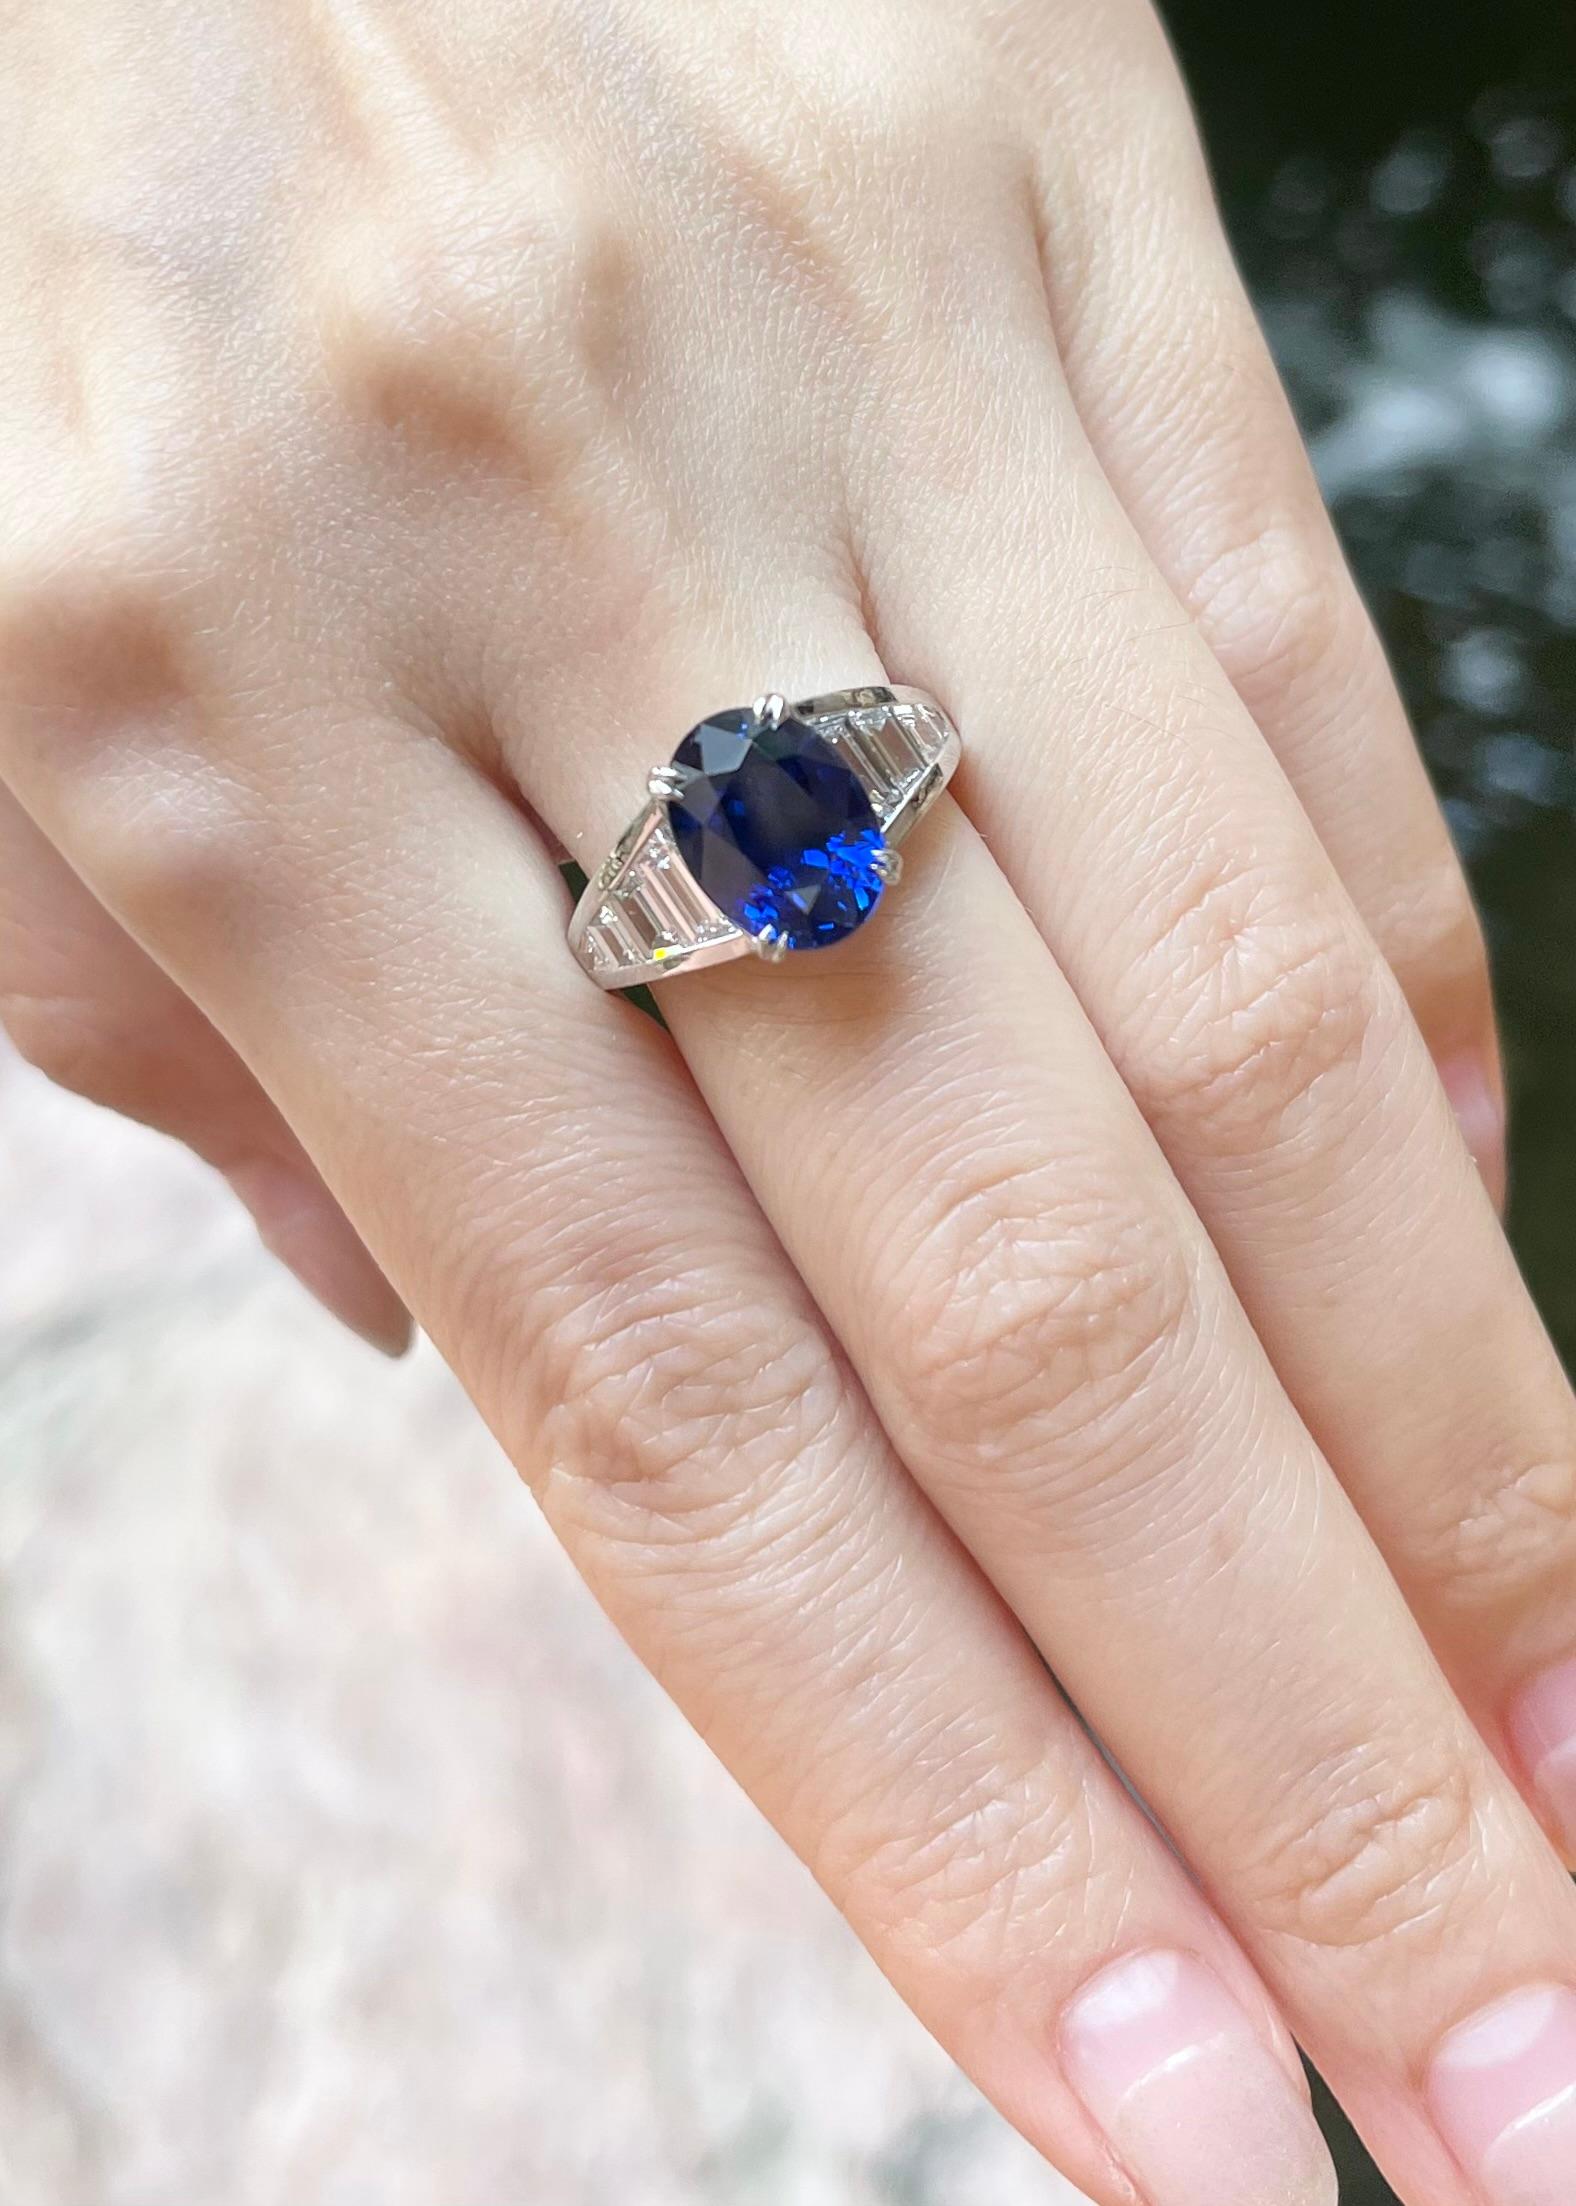 Women's Royal Blue Sapphire with Diamond Ring set in Platinum 950 Settings For Sale